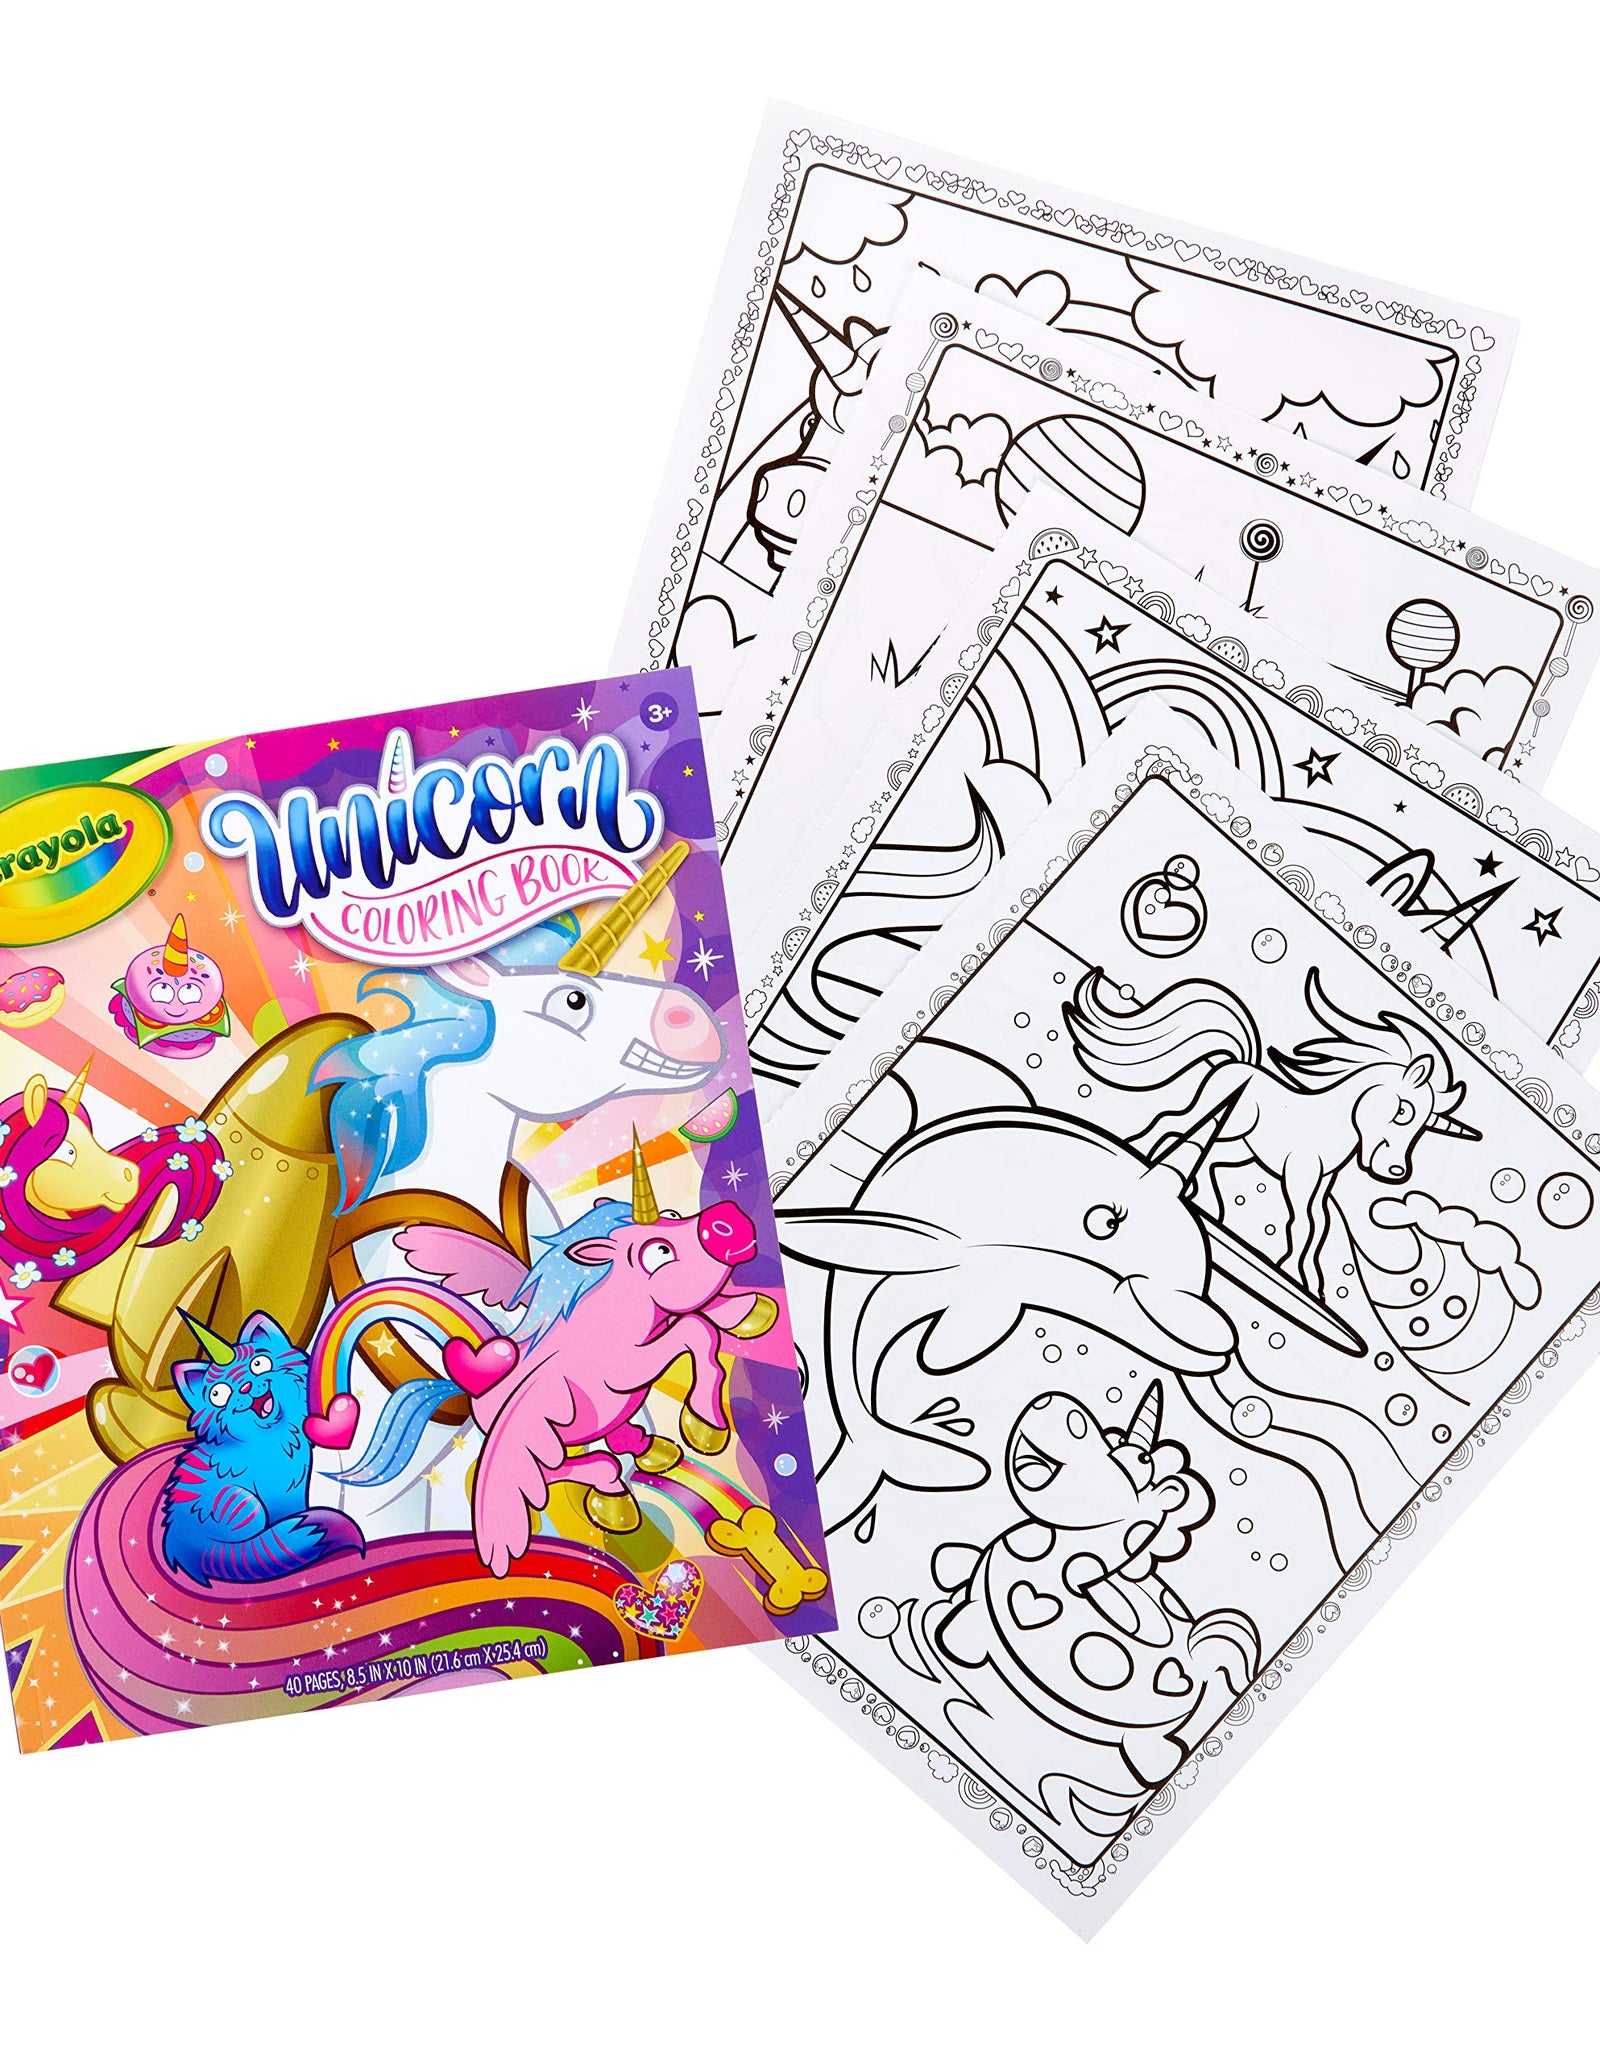 Crayola Unicorn Coloring Book, 40 Coloring Pages, Gift for Kids, Ages 3, 4, 5, 6